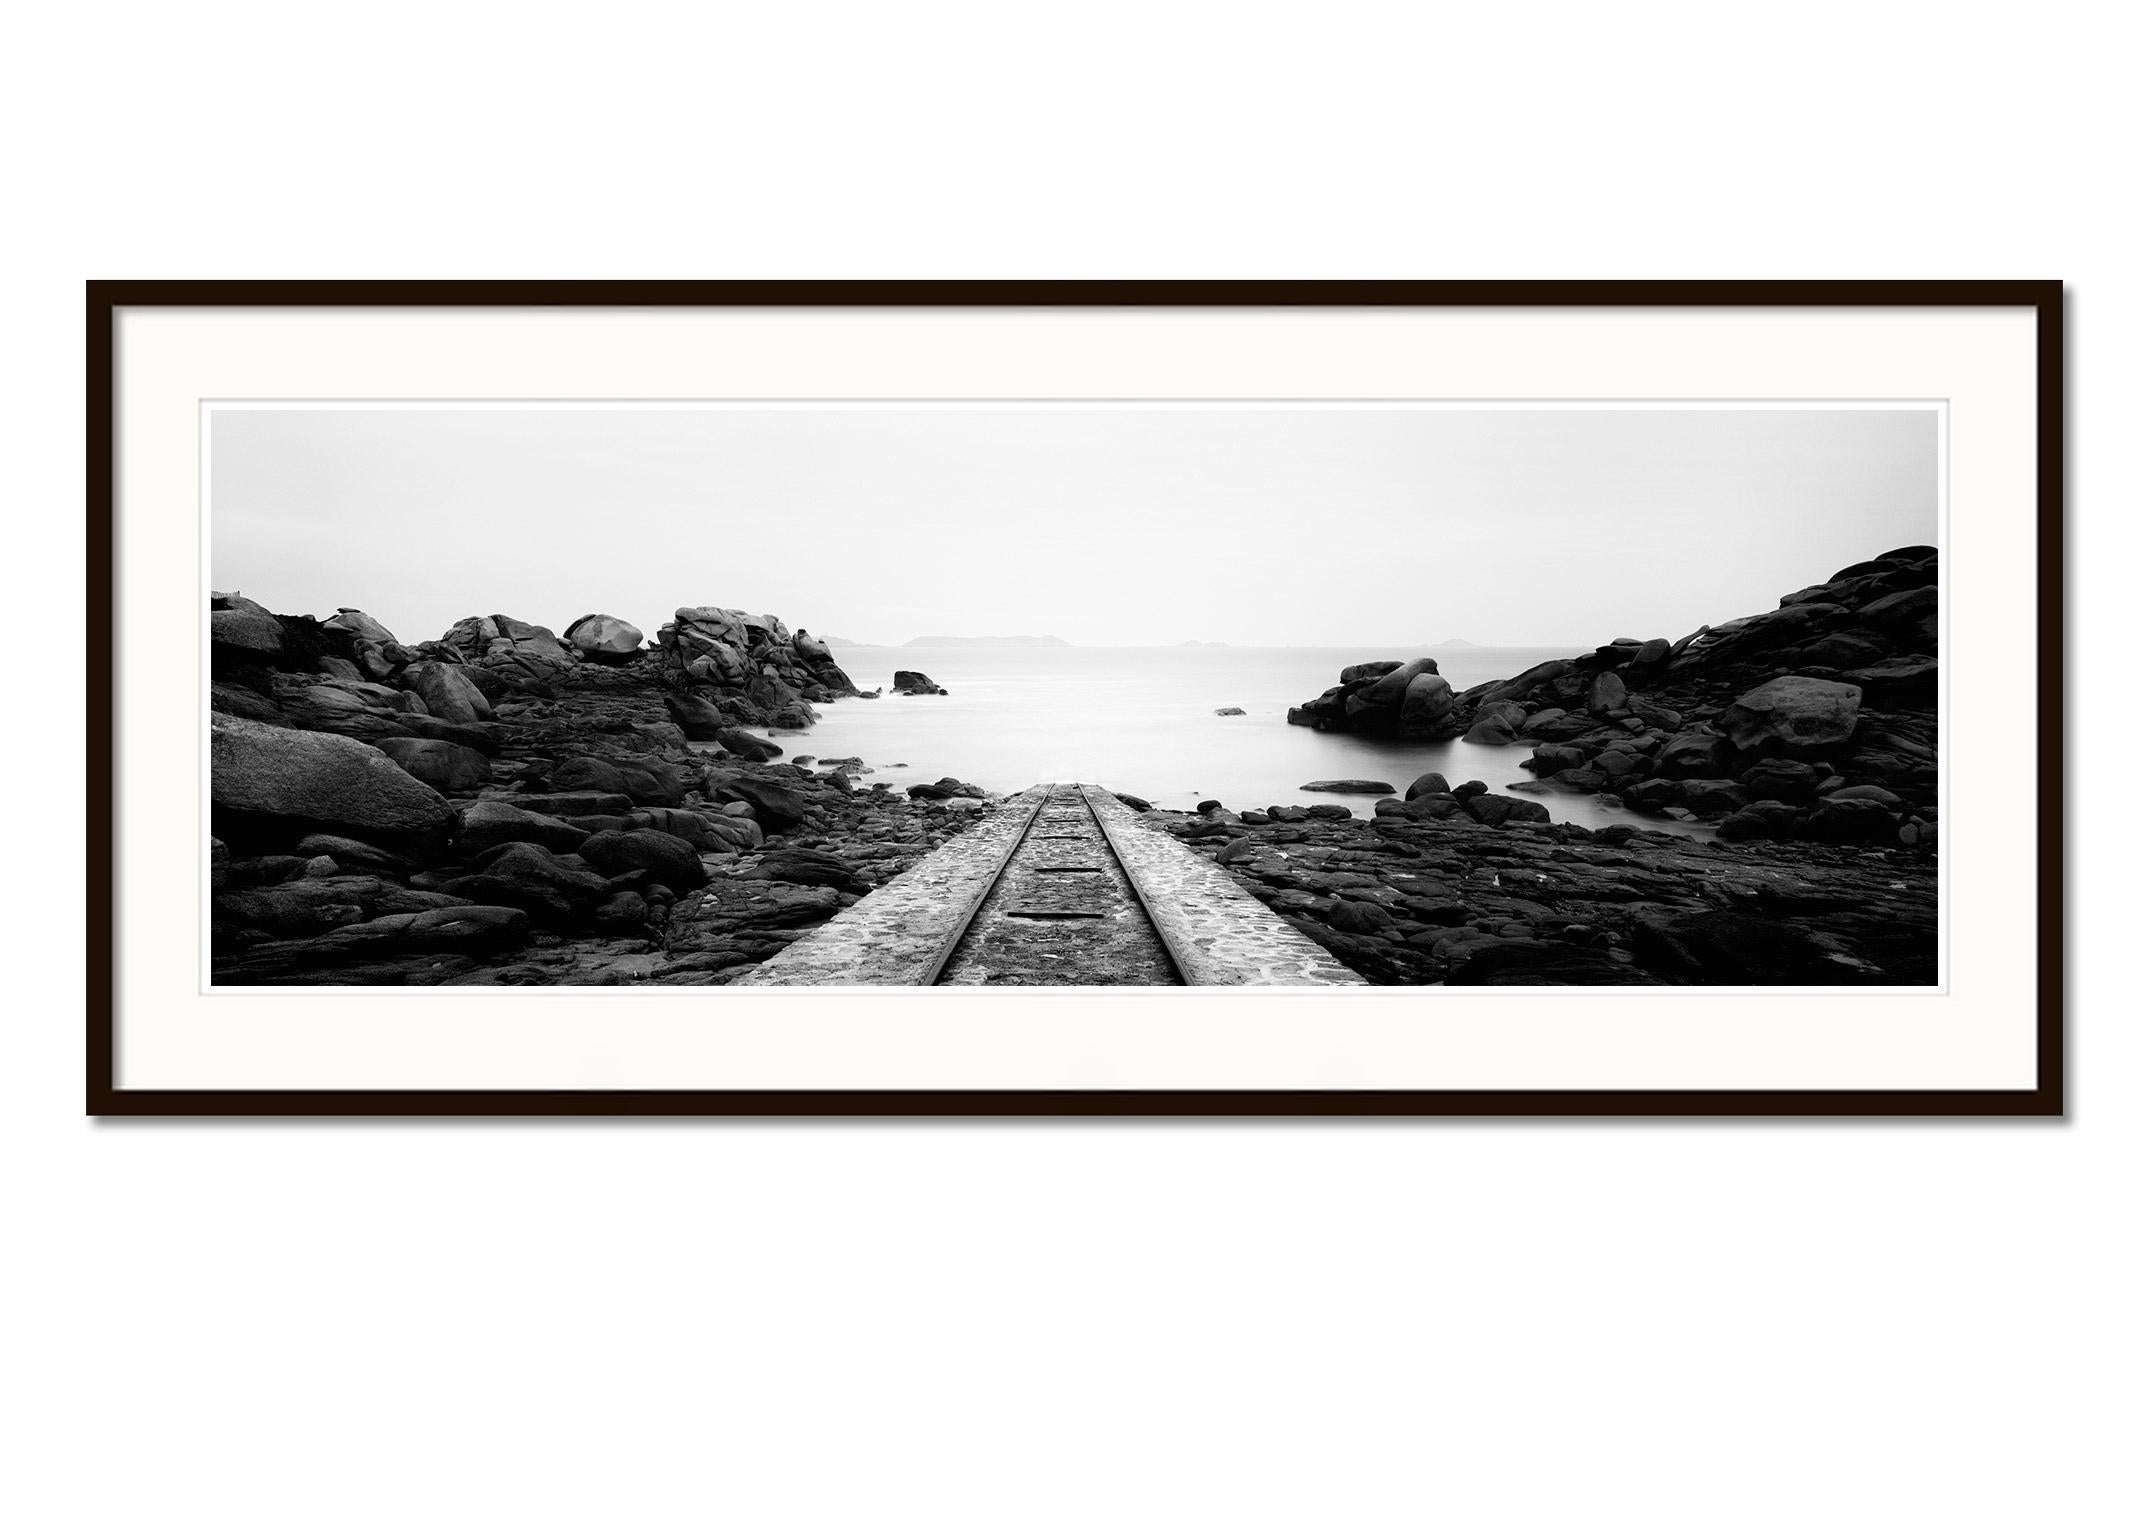 Into the Ocean France contemporary black white fine art landscape photography - Gray Black and White Photograph by Gerald Berghammer